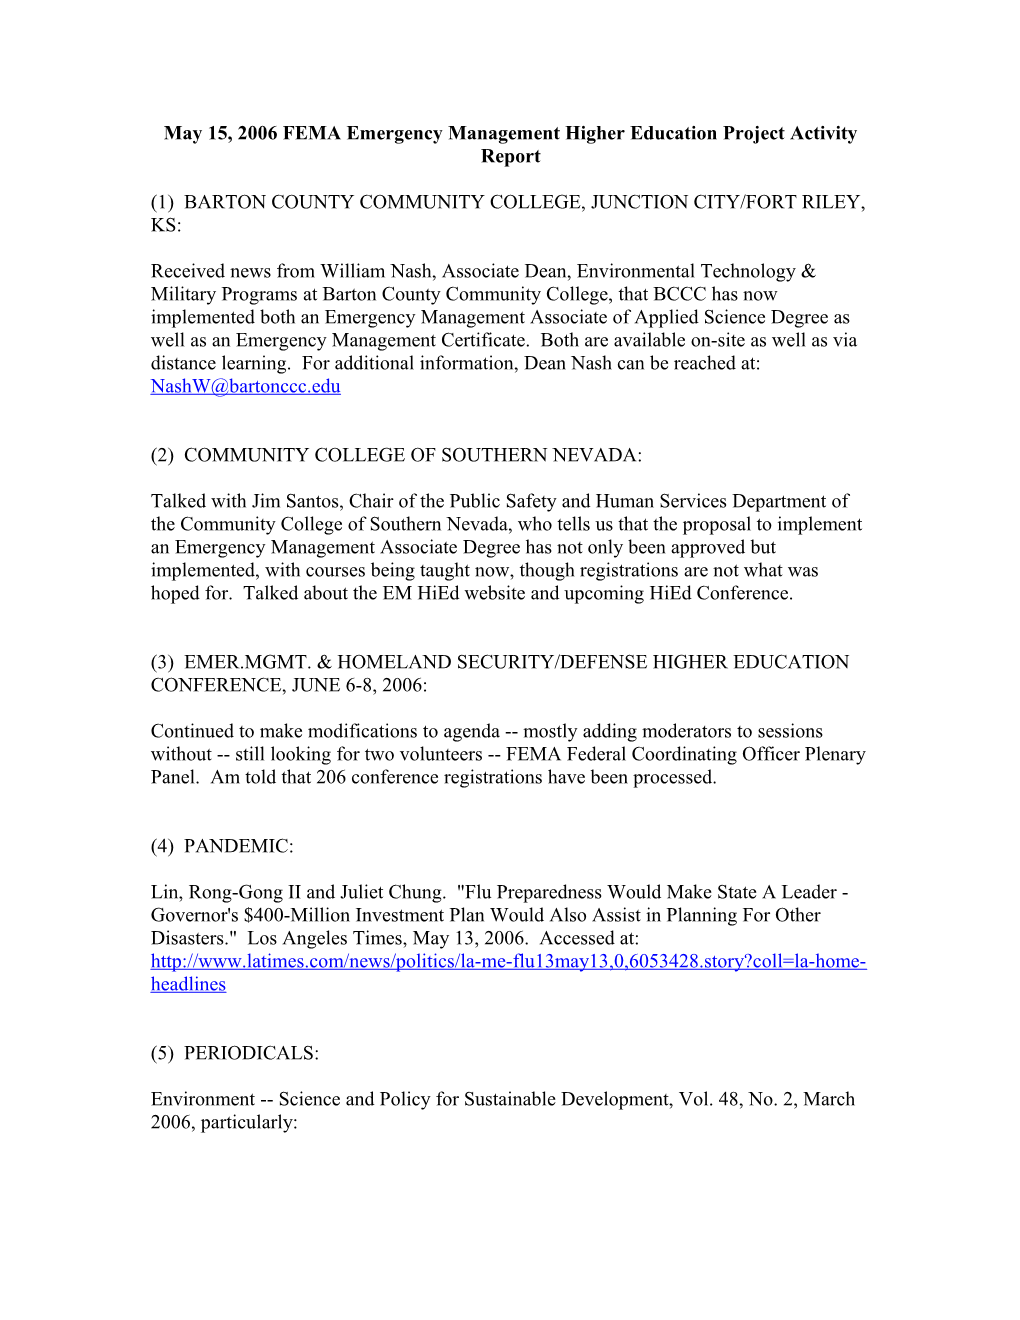 May 15, 2006 FEMA Emergency Management Higher Education Project Activity Report